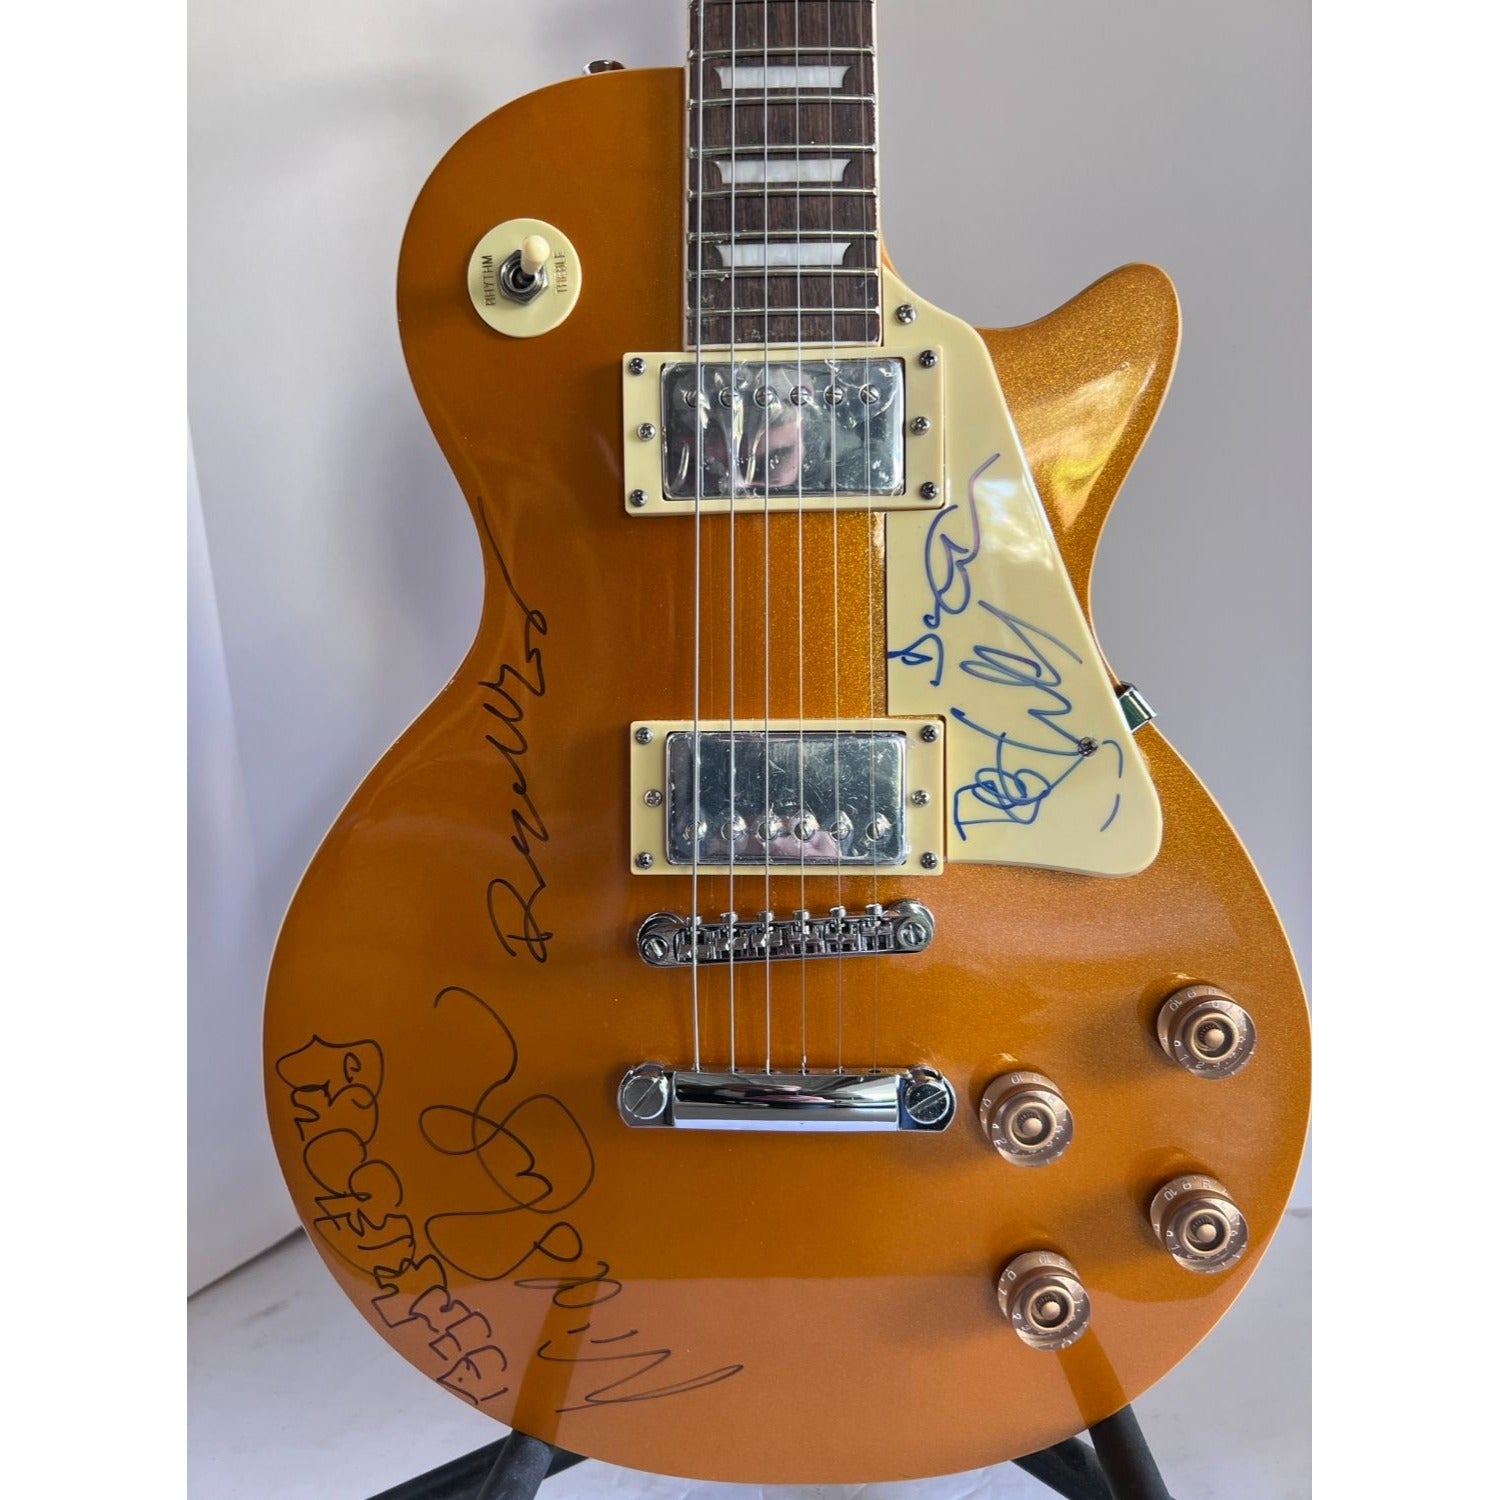 Pink Floyd David Gilmour, Roger Waters, Nick Mason and Richard Wright signed  Les Paul gold top full sixe electric guitar with proof